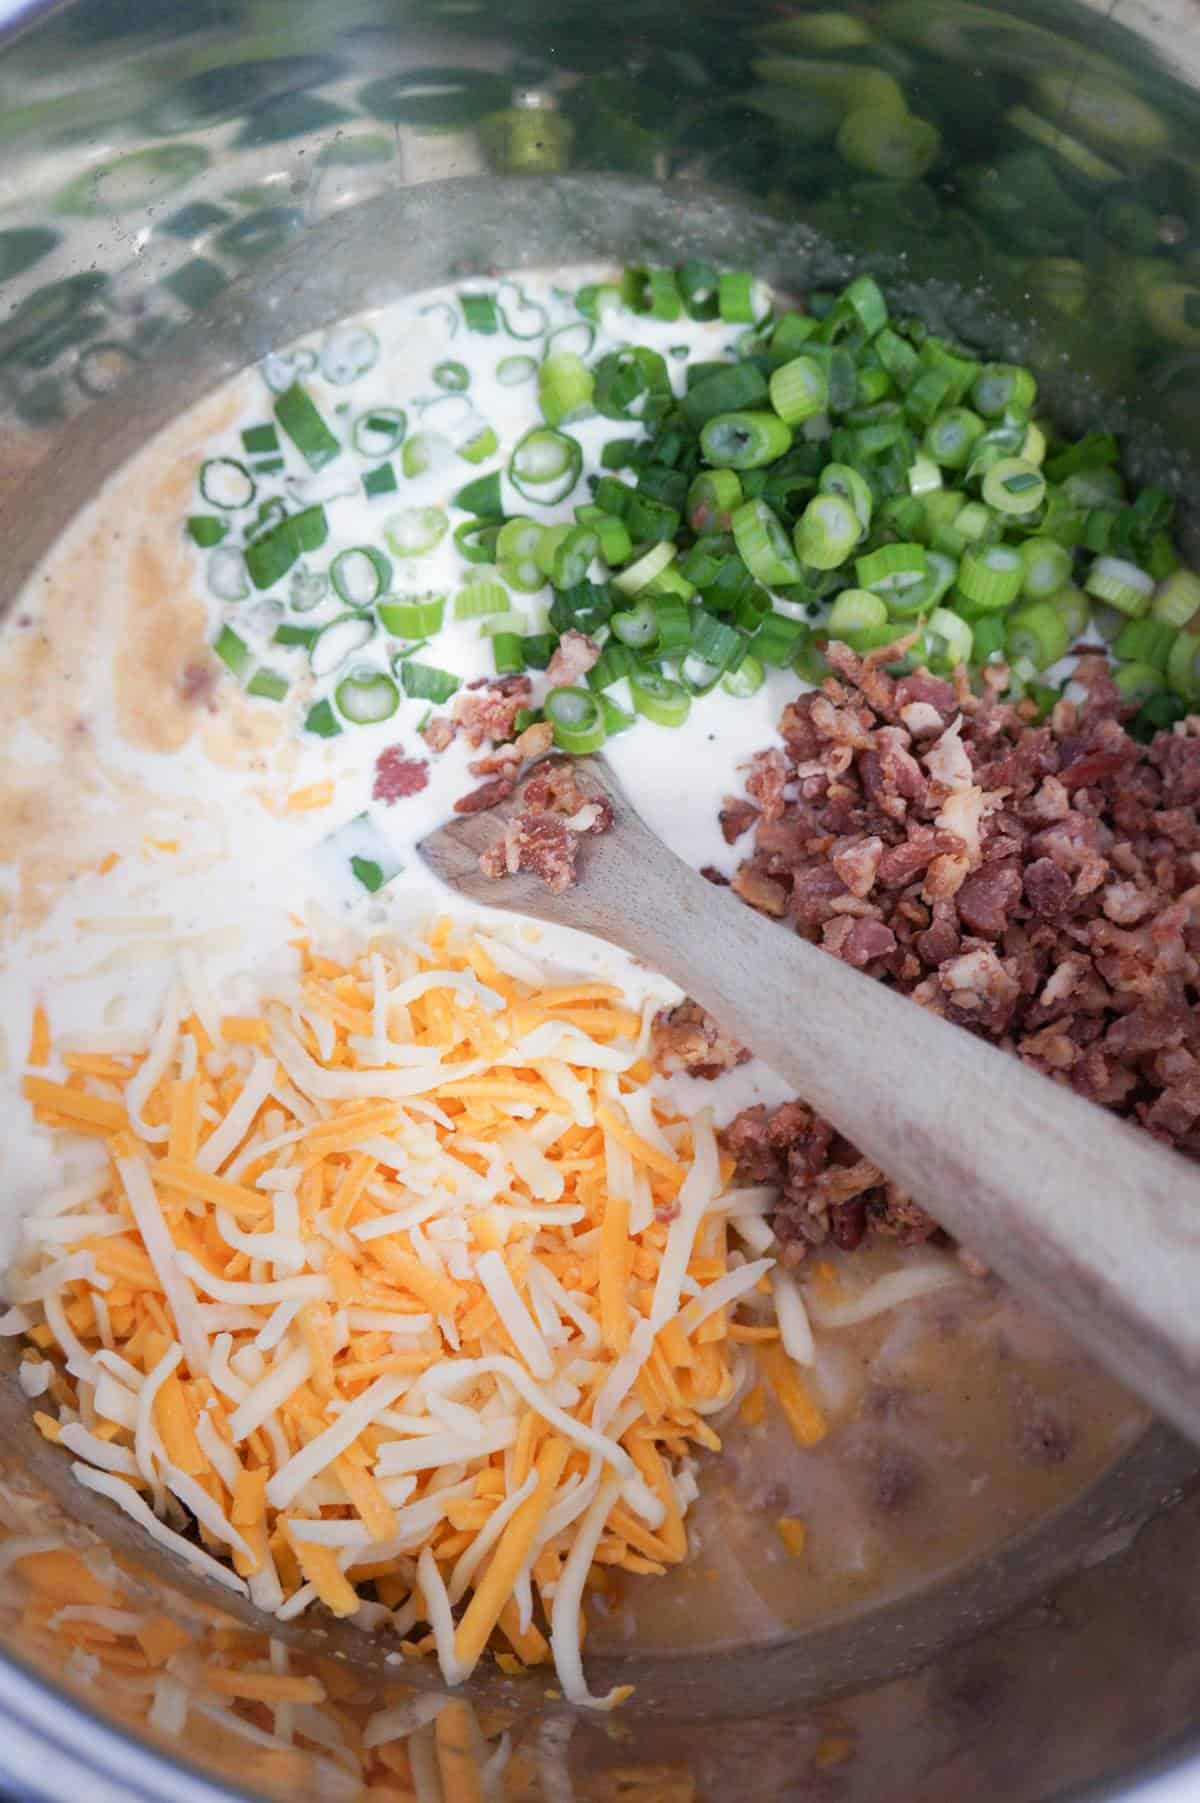 shredded cheddar cheese, chopped green onions and crumbled bacon on top of creamy soup mixture in an Instant Pot